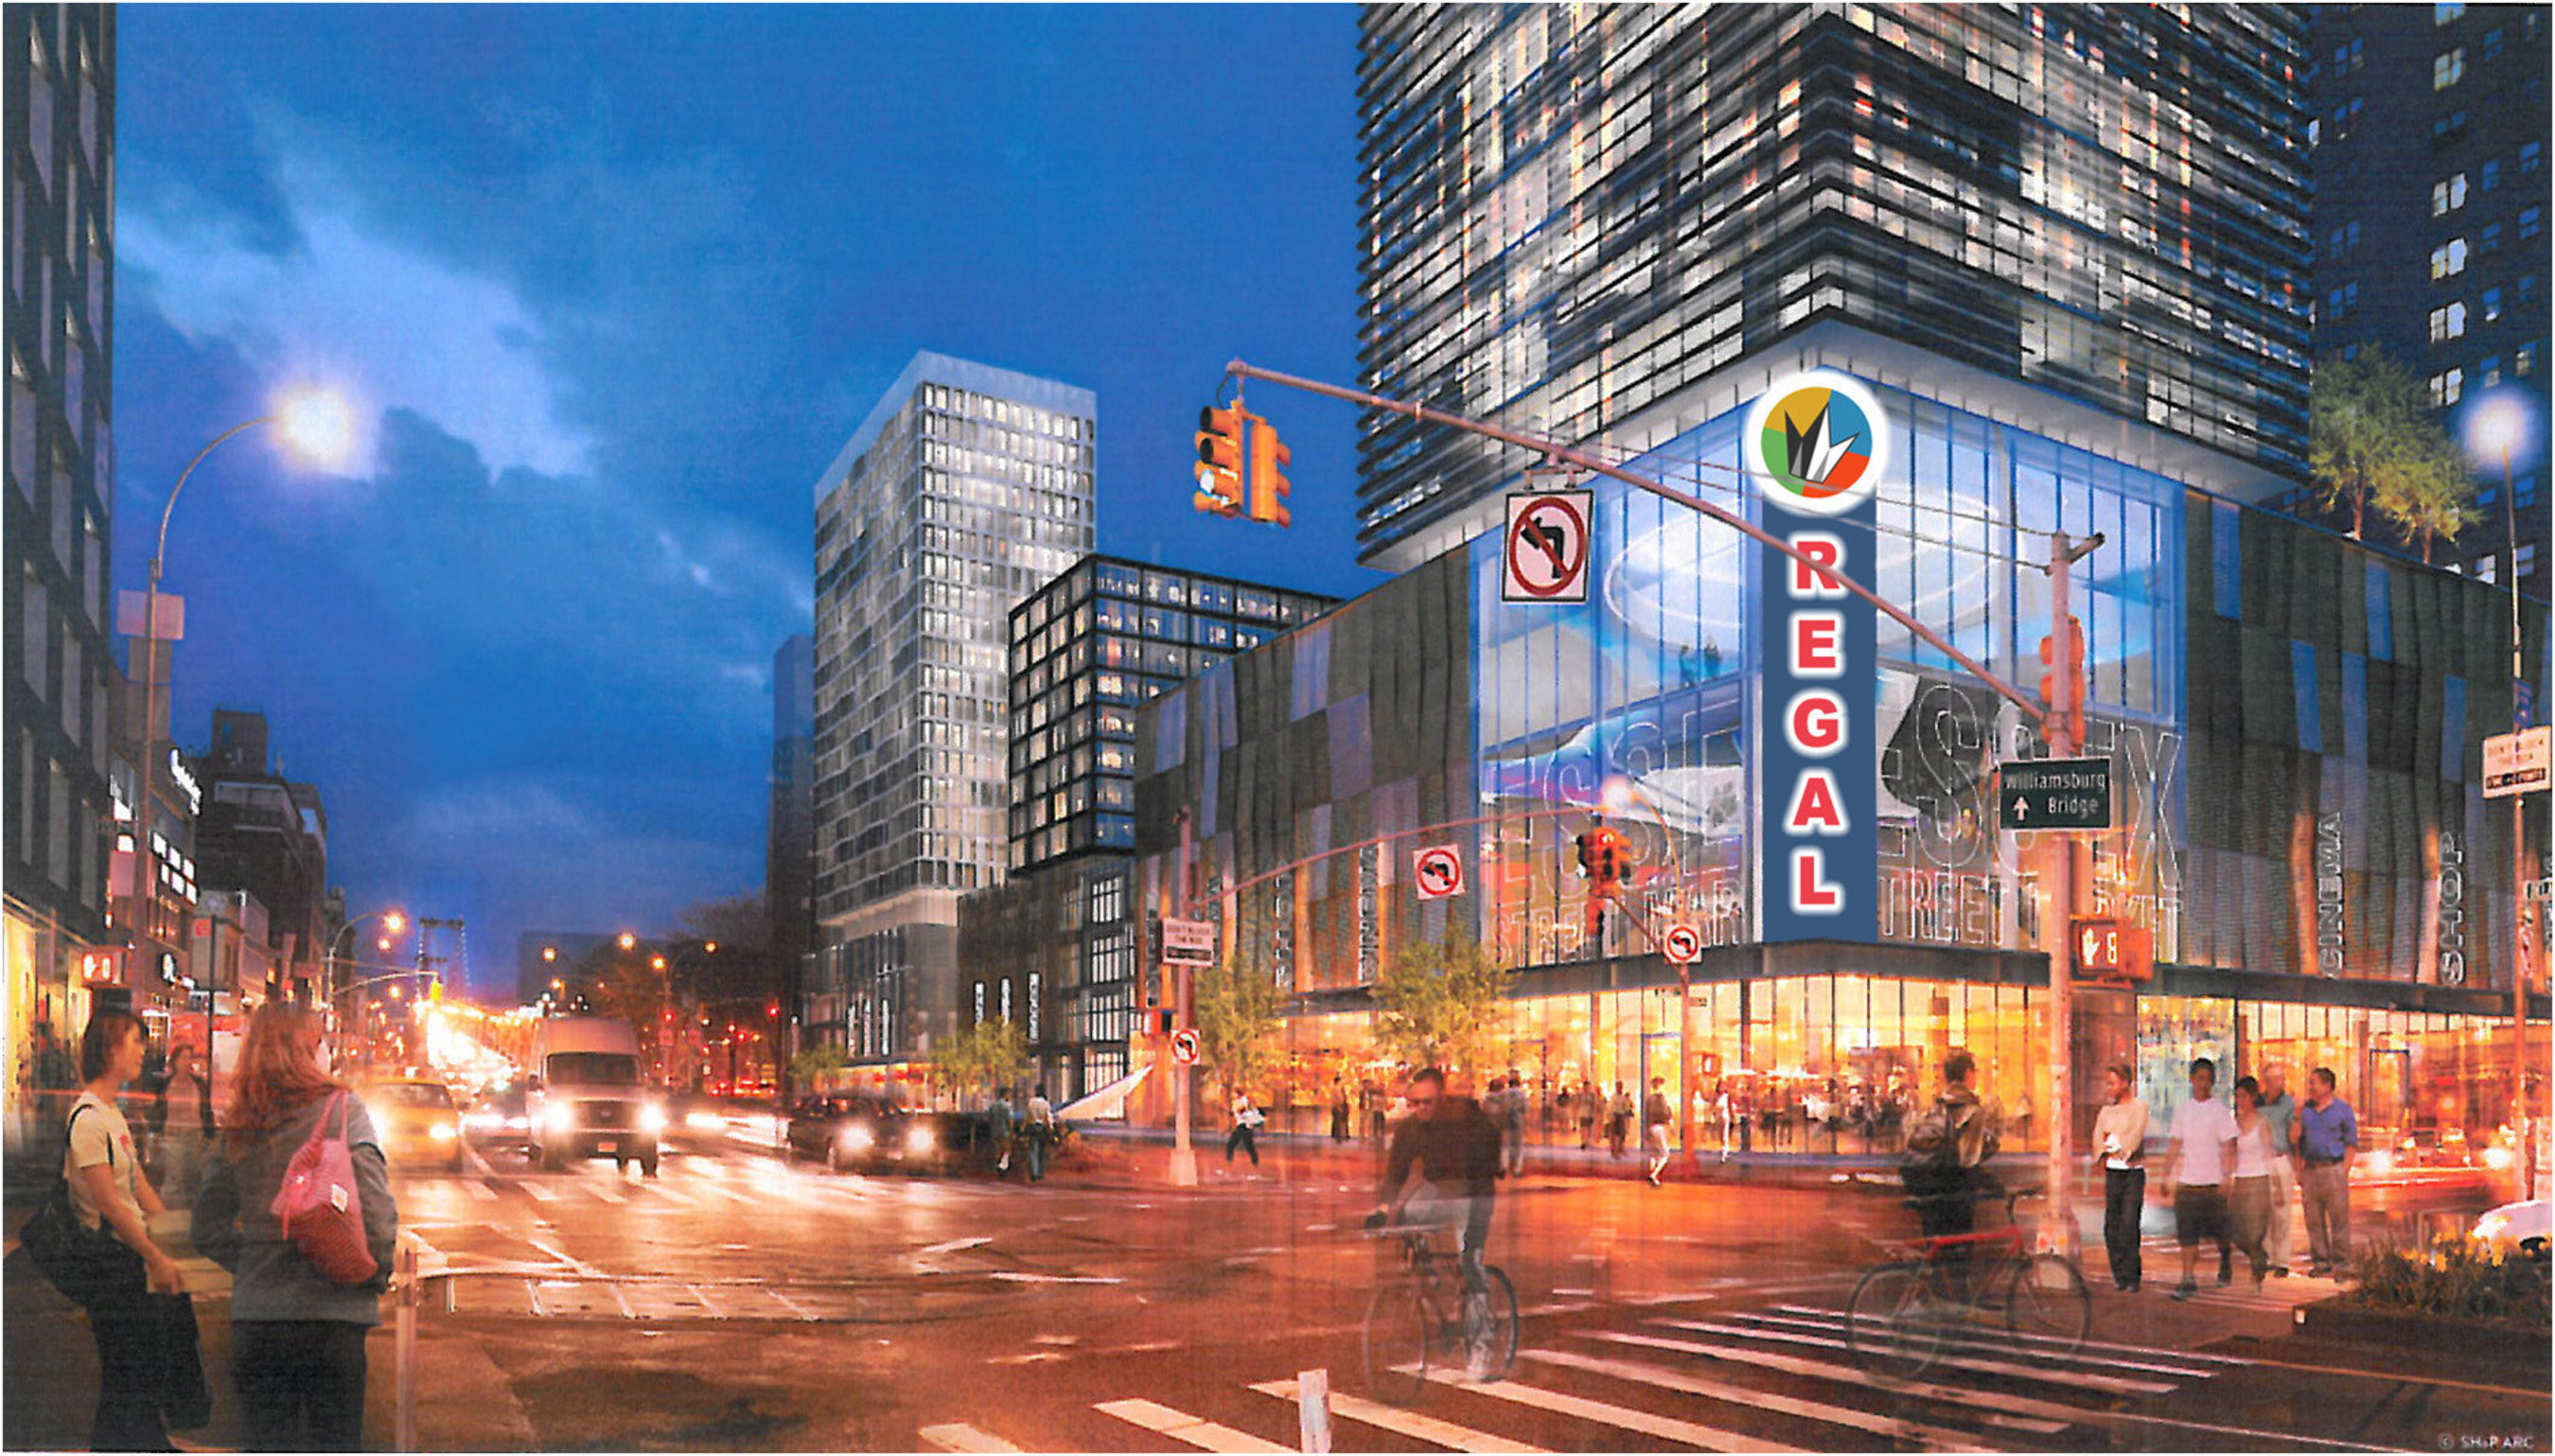 Regal Entertainment Group announces construction plans for a new Regal Cinemas in Manhattan with luxurious recliners in every auditorium. Image Source: Delancey Street Associates